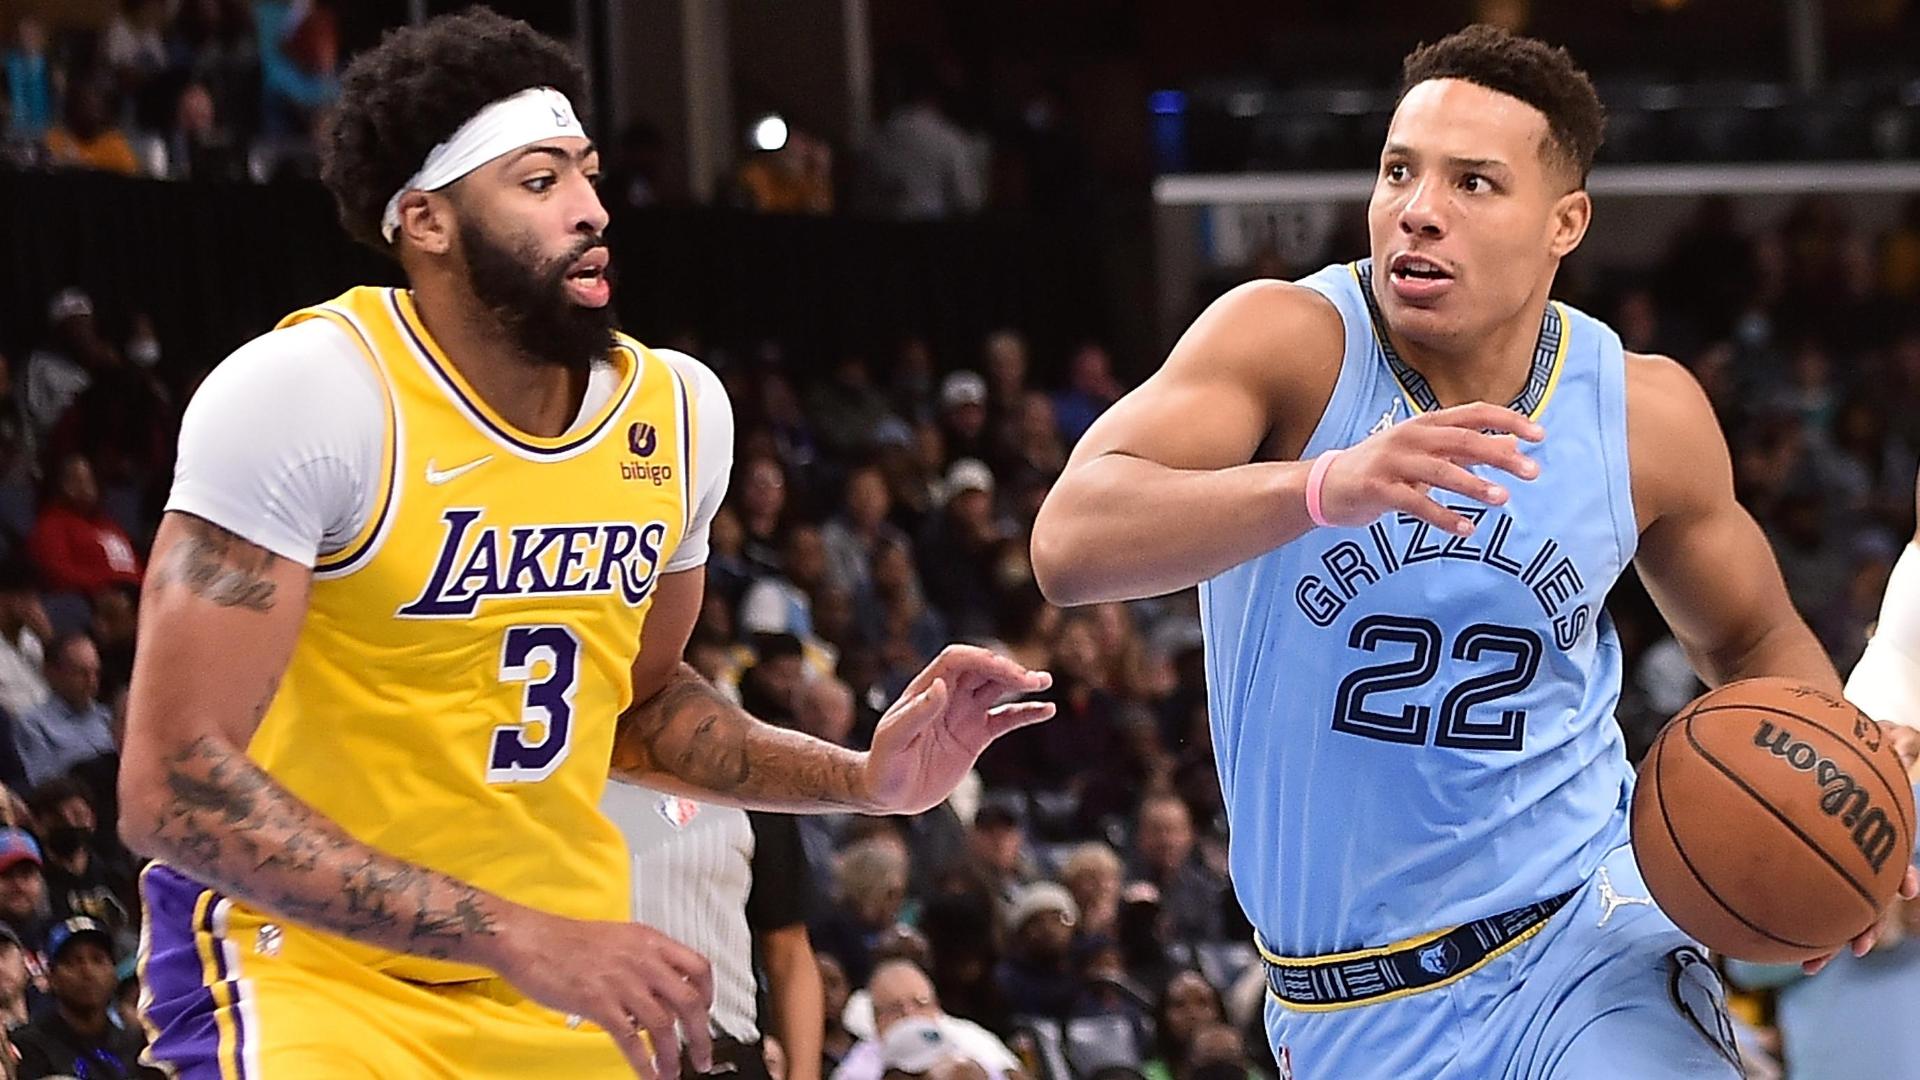 No Morant, no problem for Grizzlies, who cruise by Lakers